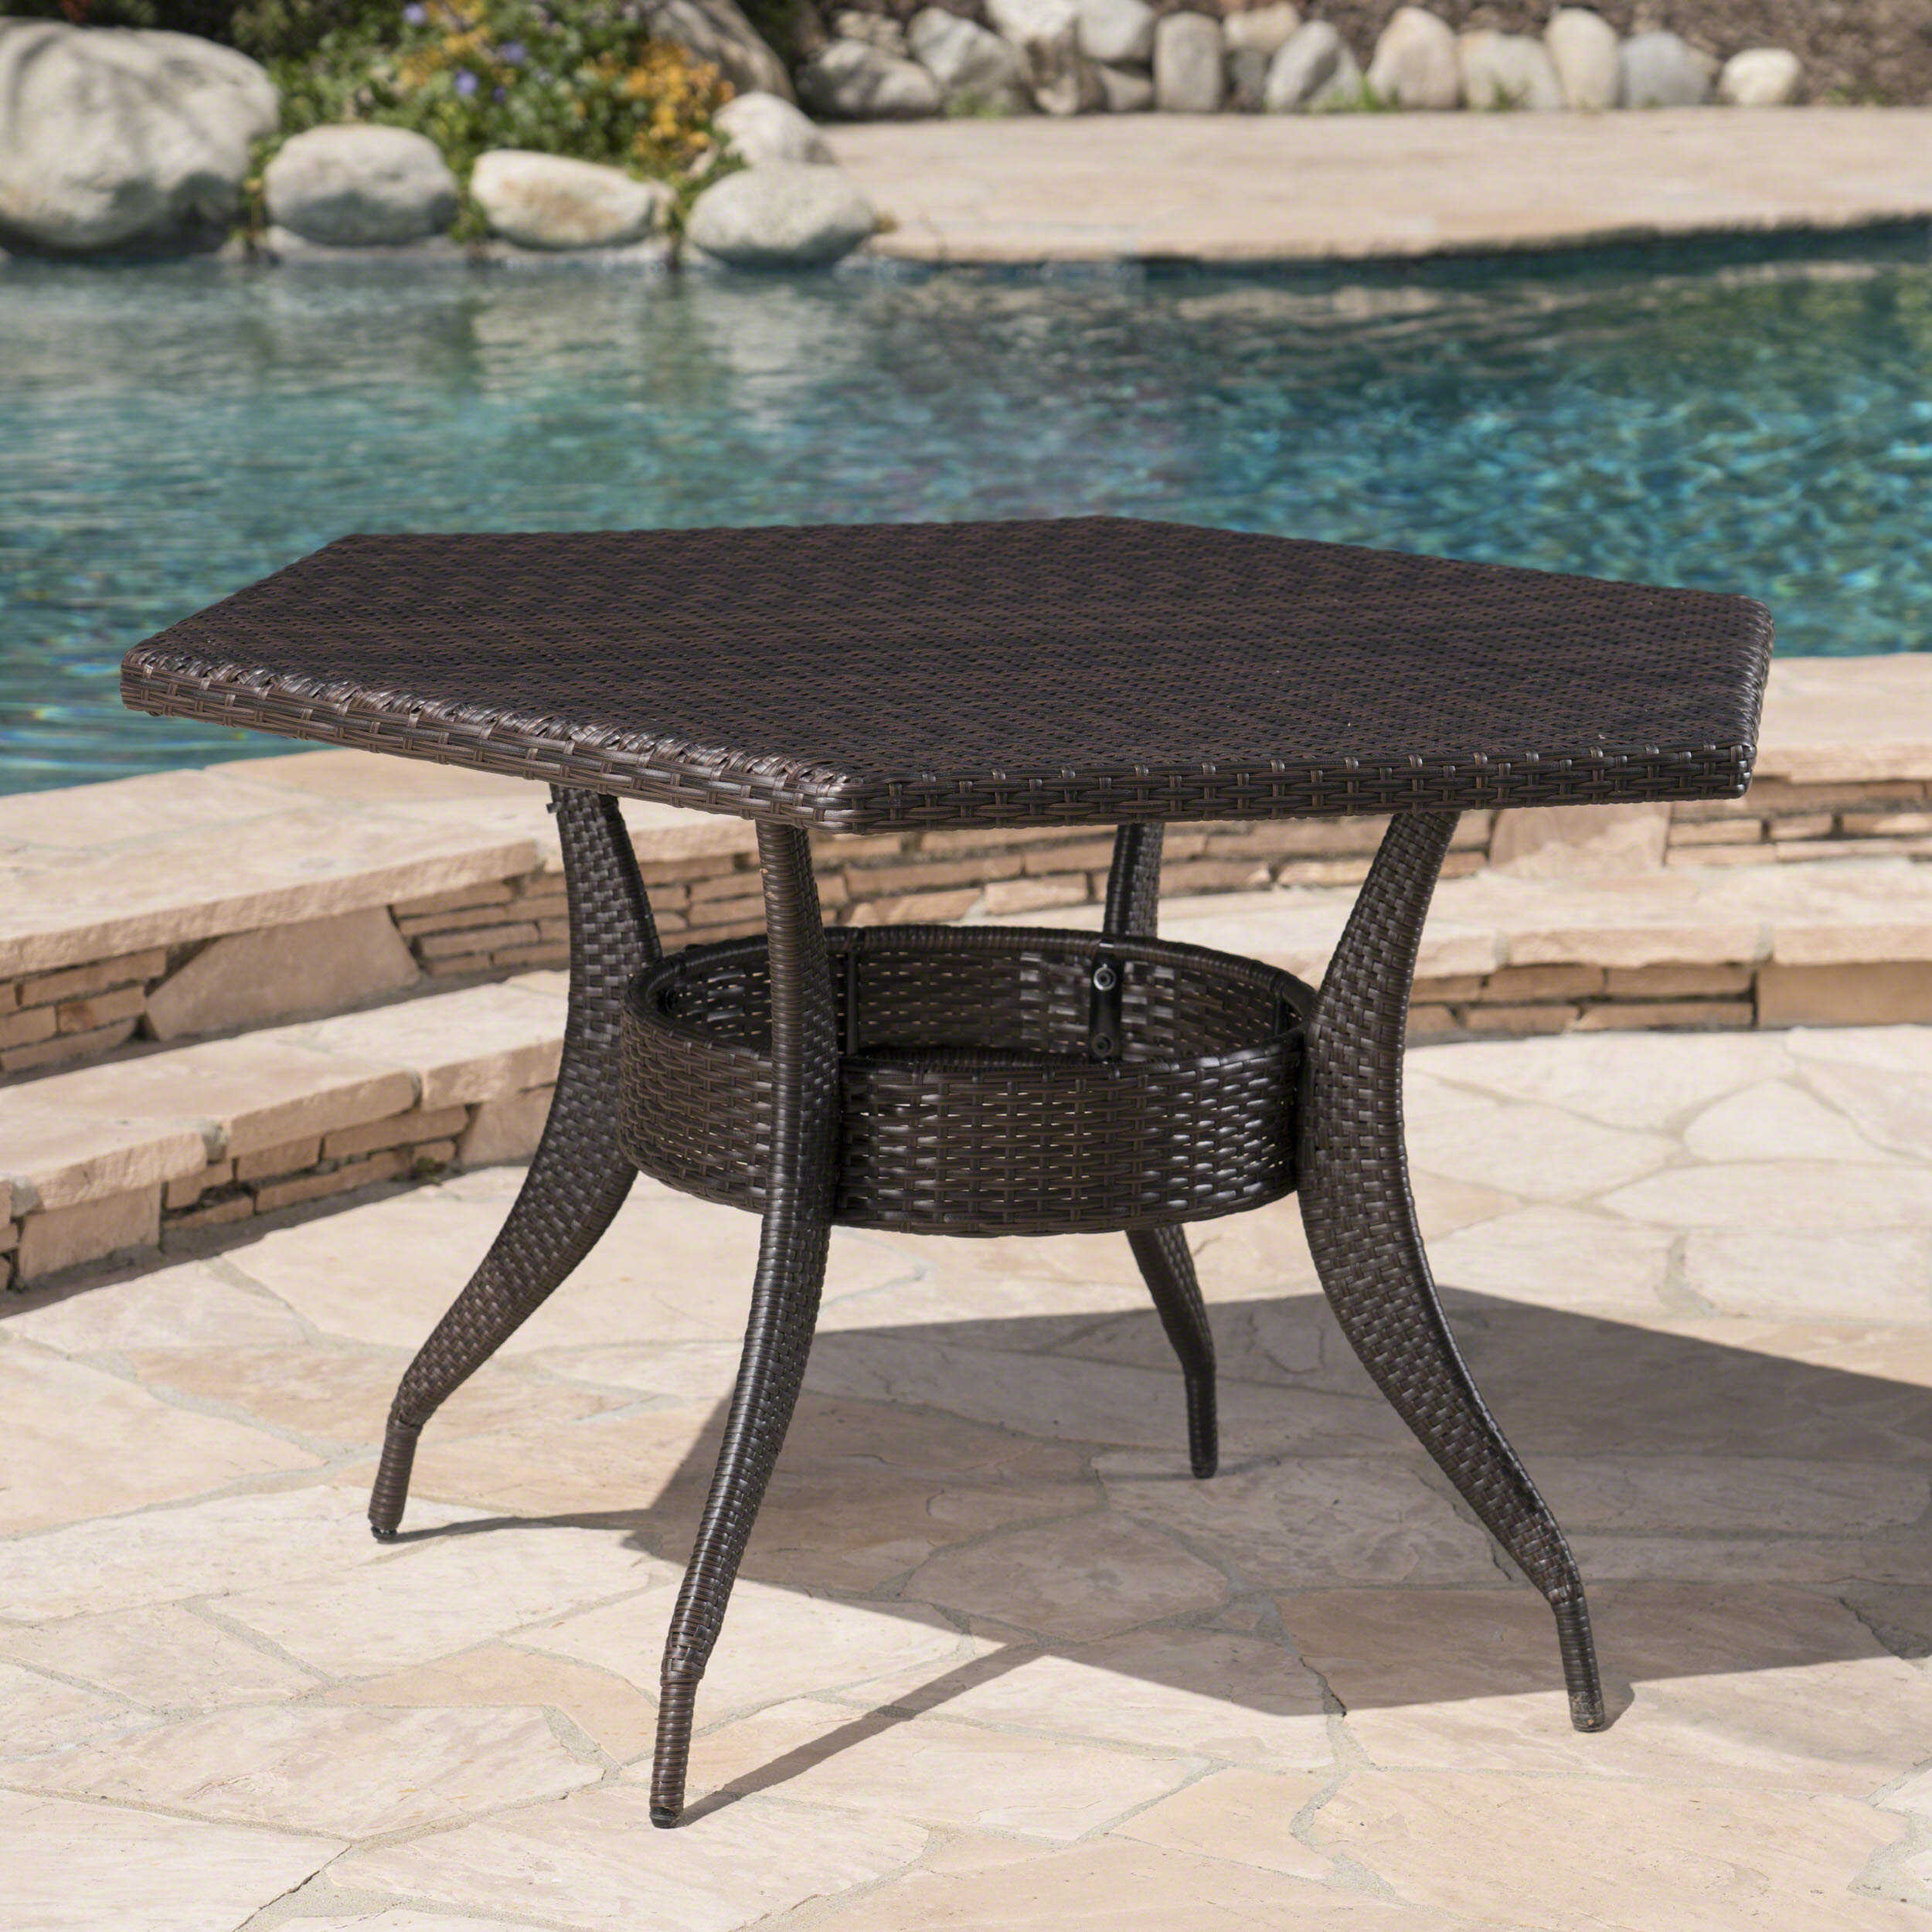 Outdoor 53-Inch Wicker Hexagon Dining Table, Multi Brown - image 1 of 9